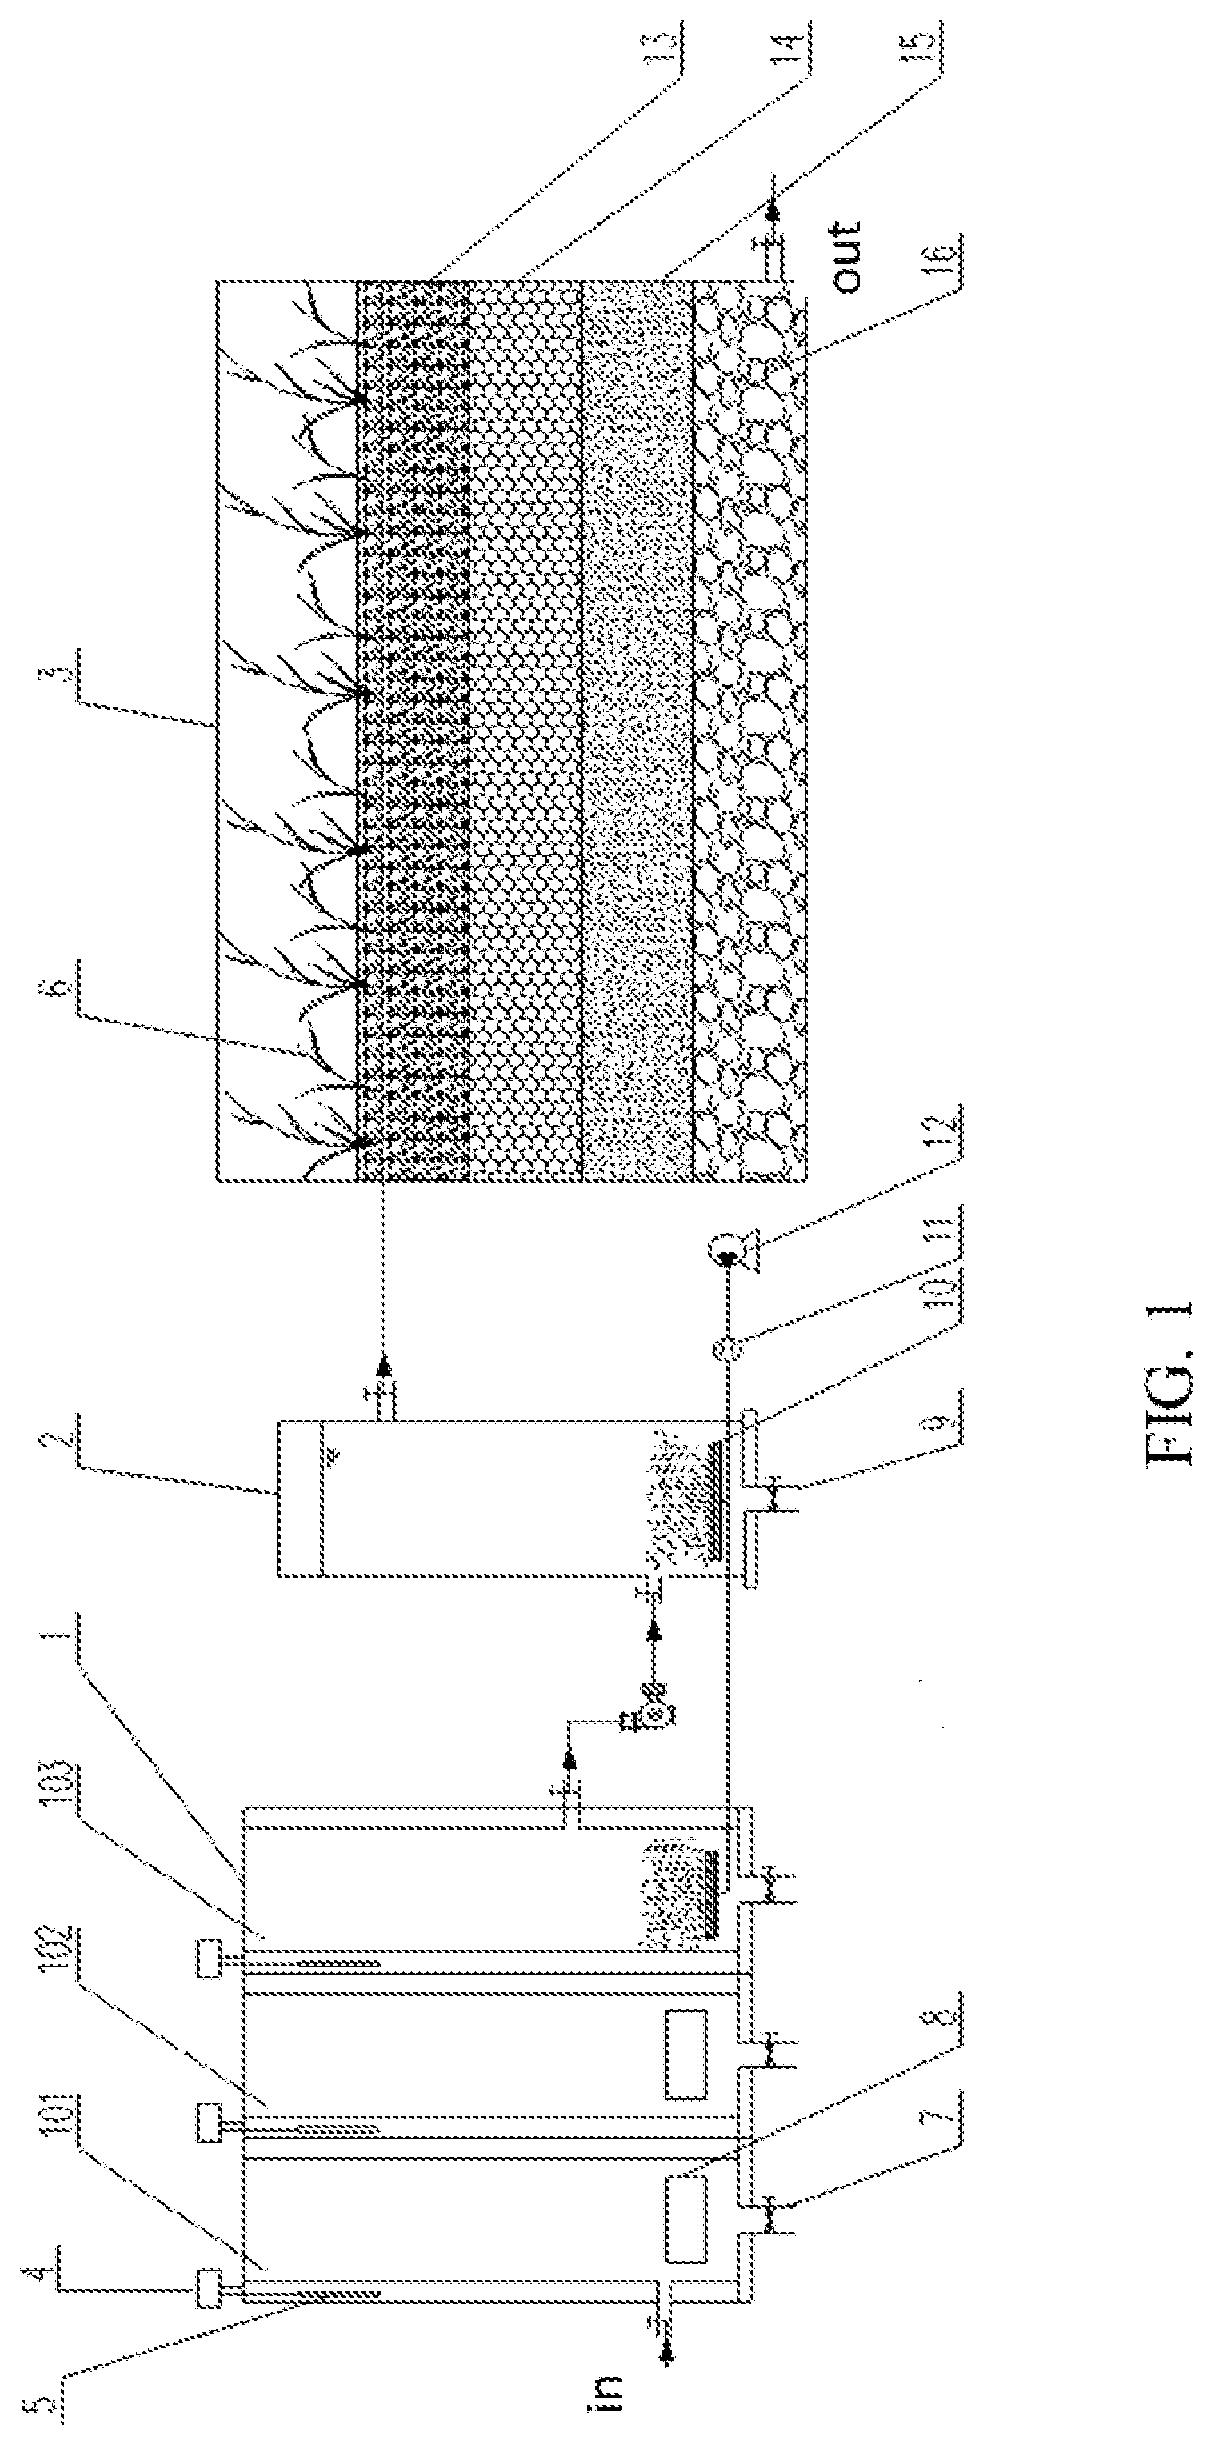 Method and device for preventing and controlling pollutants in the reuse of reclaimed water in agricultural activity areas with extreme water shortage